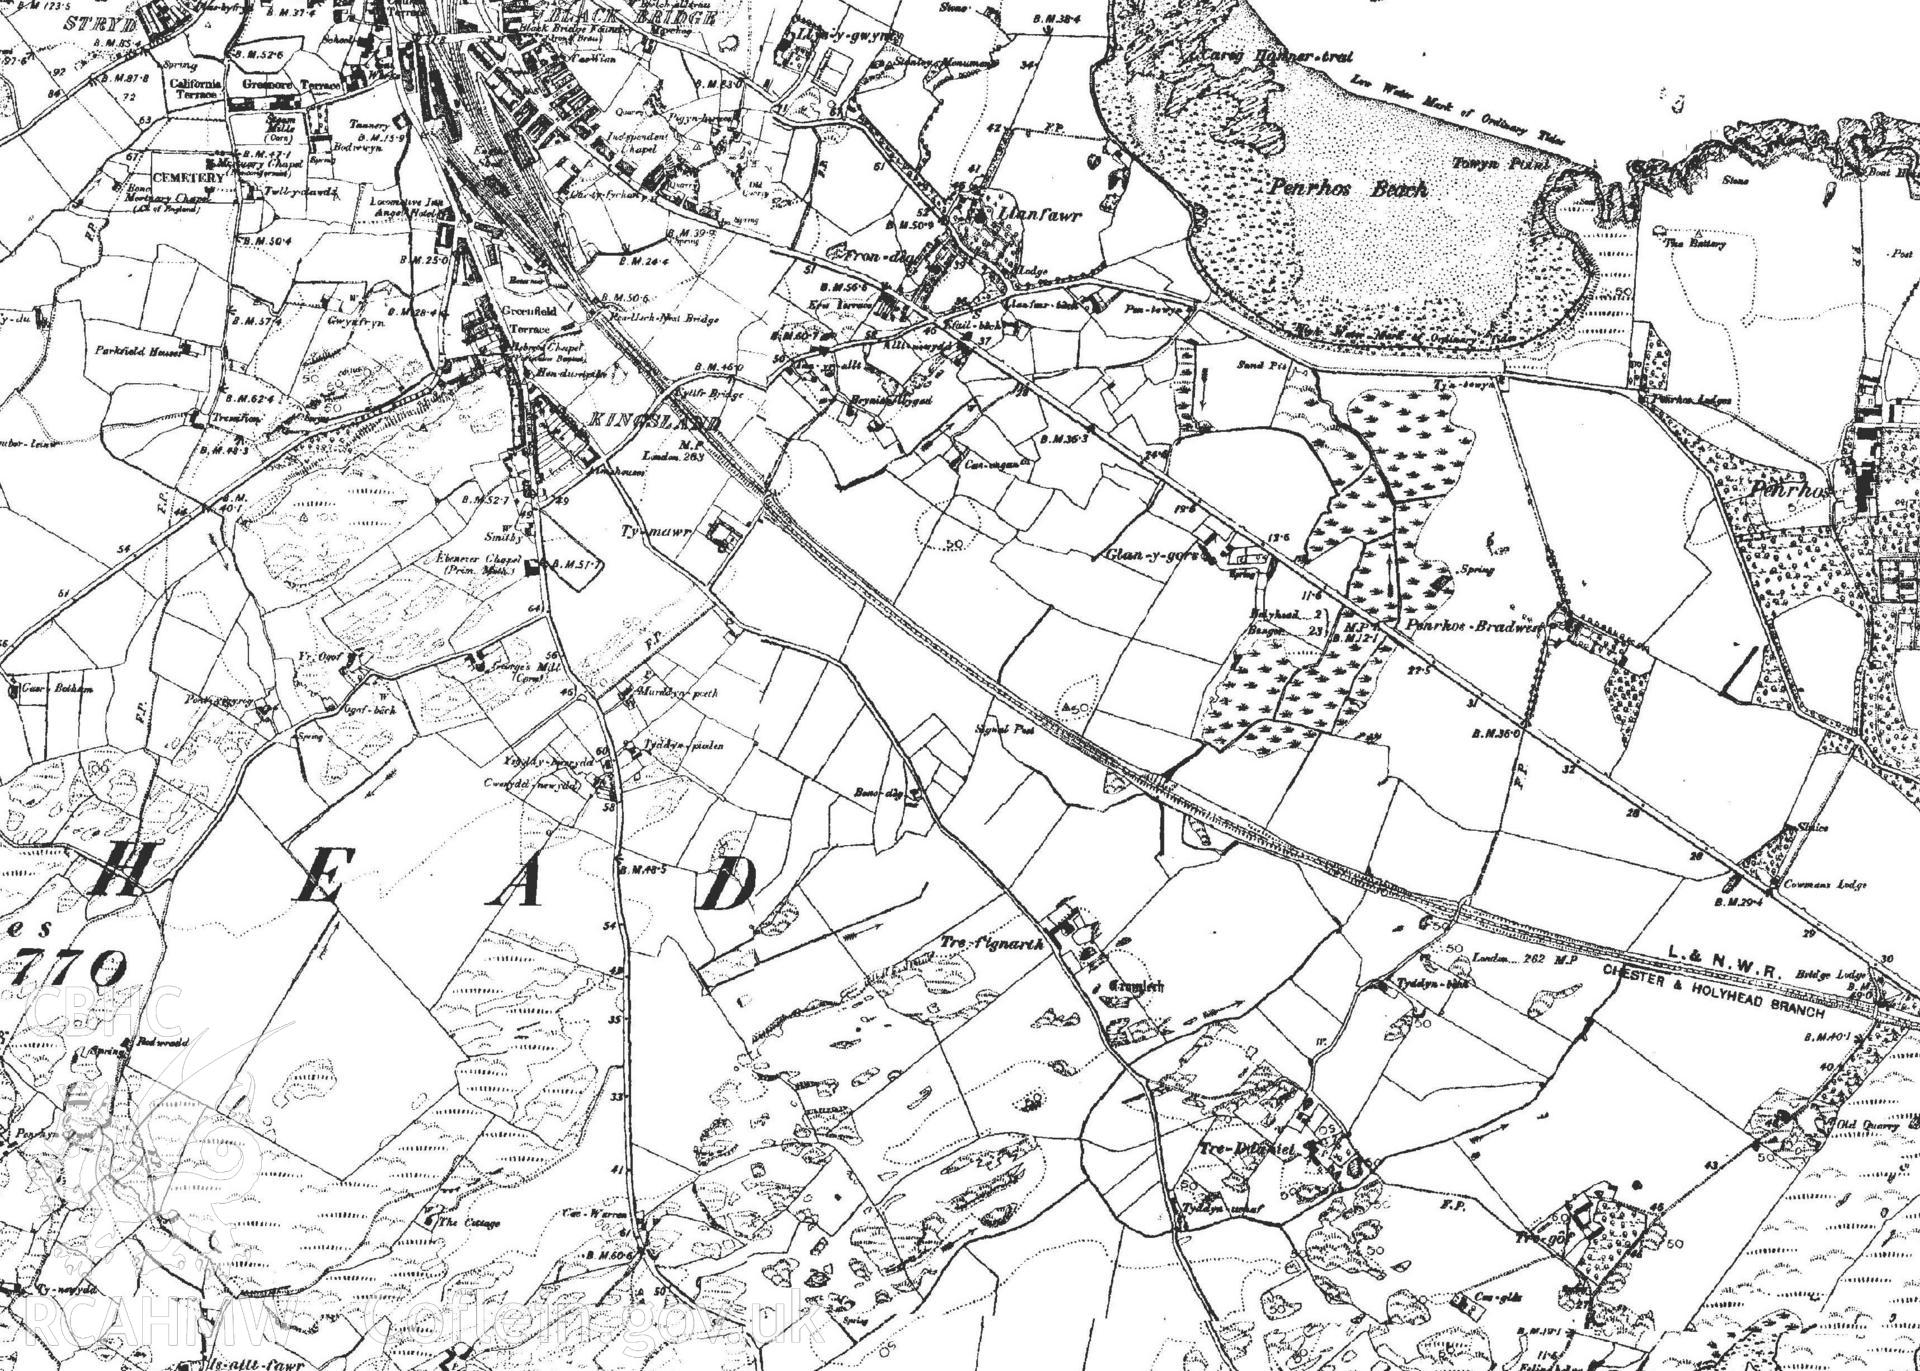 Extract of the Ordnance Survey map of 1890-91. Extract of the Holyhead tithe map. Included in material used as part of Archaeology Wales' heritage impact assessment of Parc Cybi Enterprise Zone, Holyhead, Anglesey, conducted in 2017. Project number: P2522.